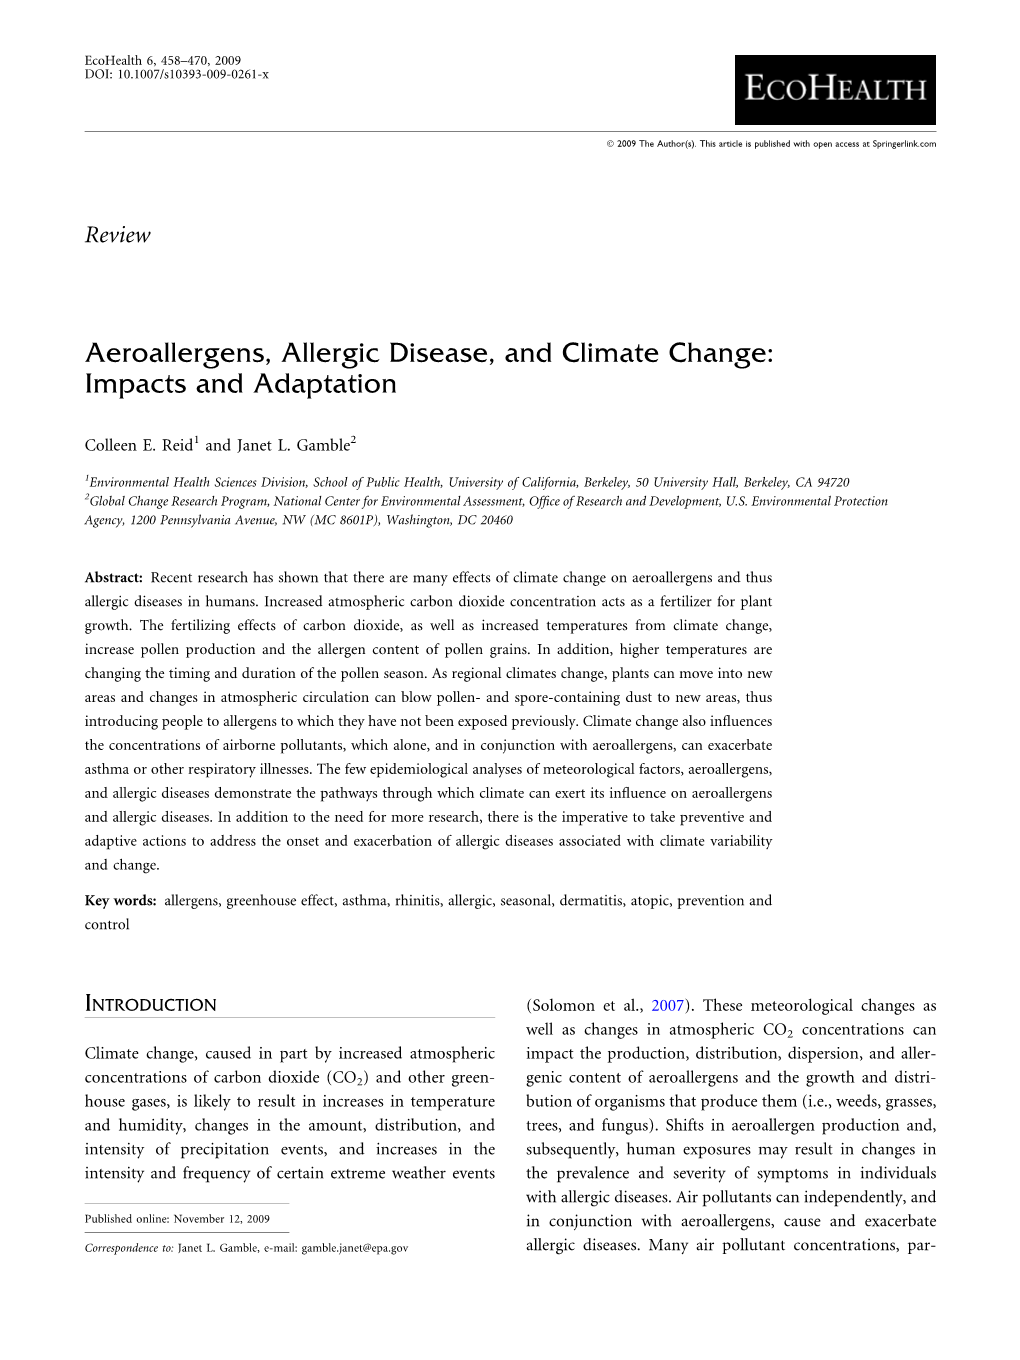 Aeroallergens, Allergic Disease, and Climate Change: Impacts and Adaptation